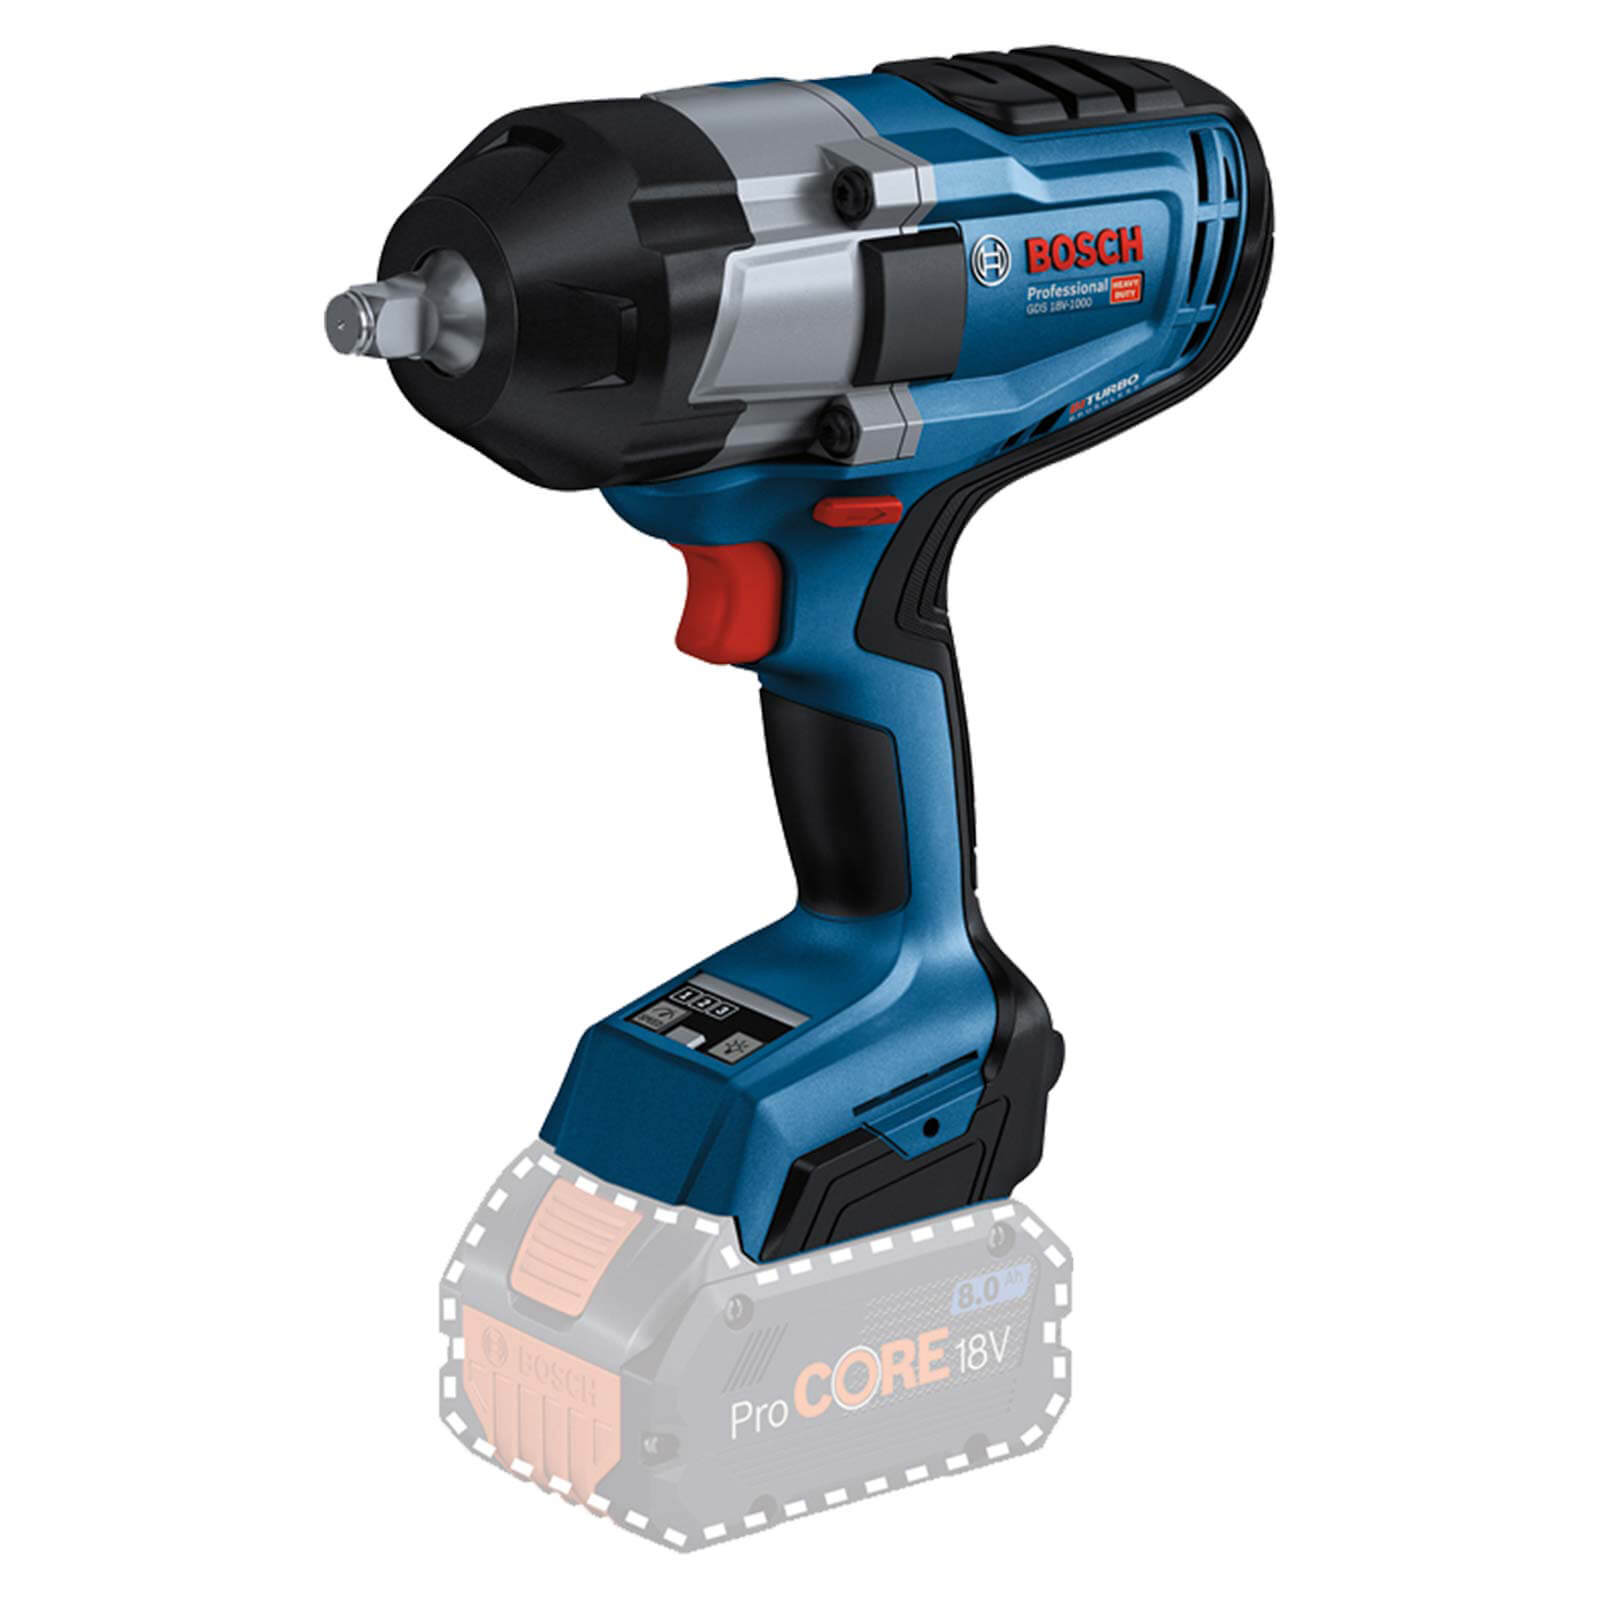 Photo of Bosch Gds 18v-1000 Biturbo 18v Cordless Brushless High Torque ½” Drive Impact Wrench No Batteries No Charger No Case